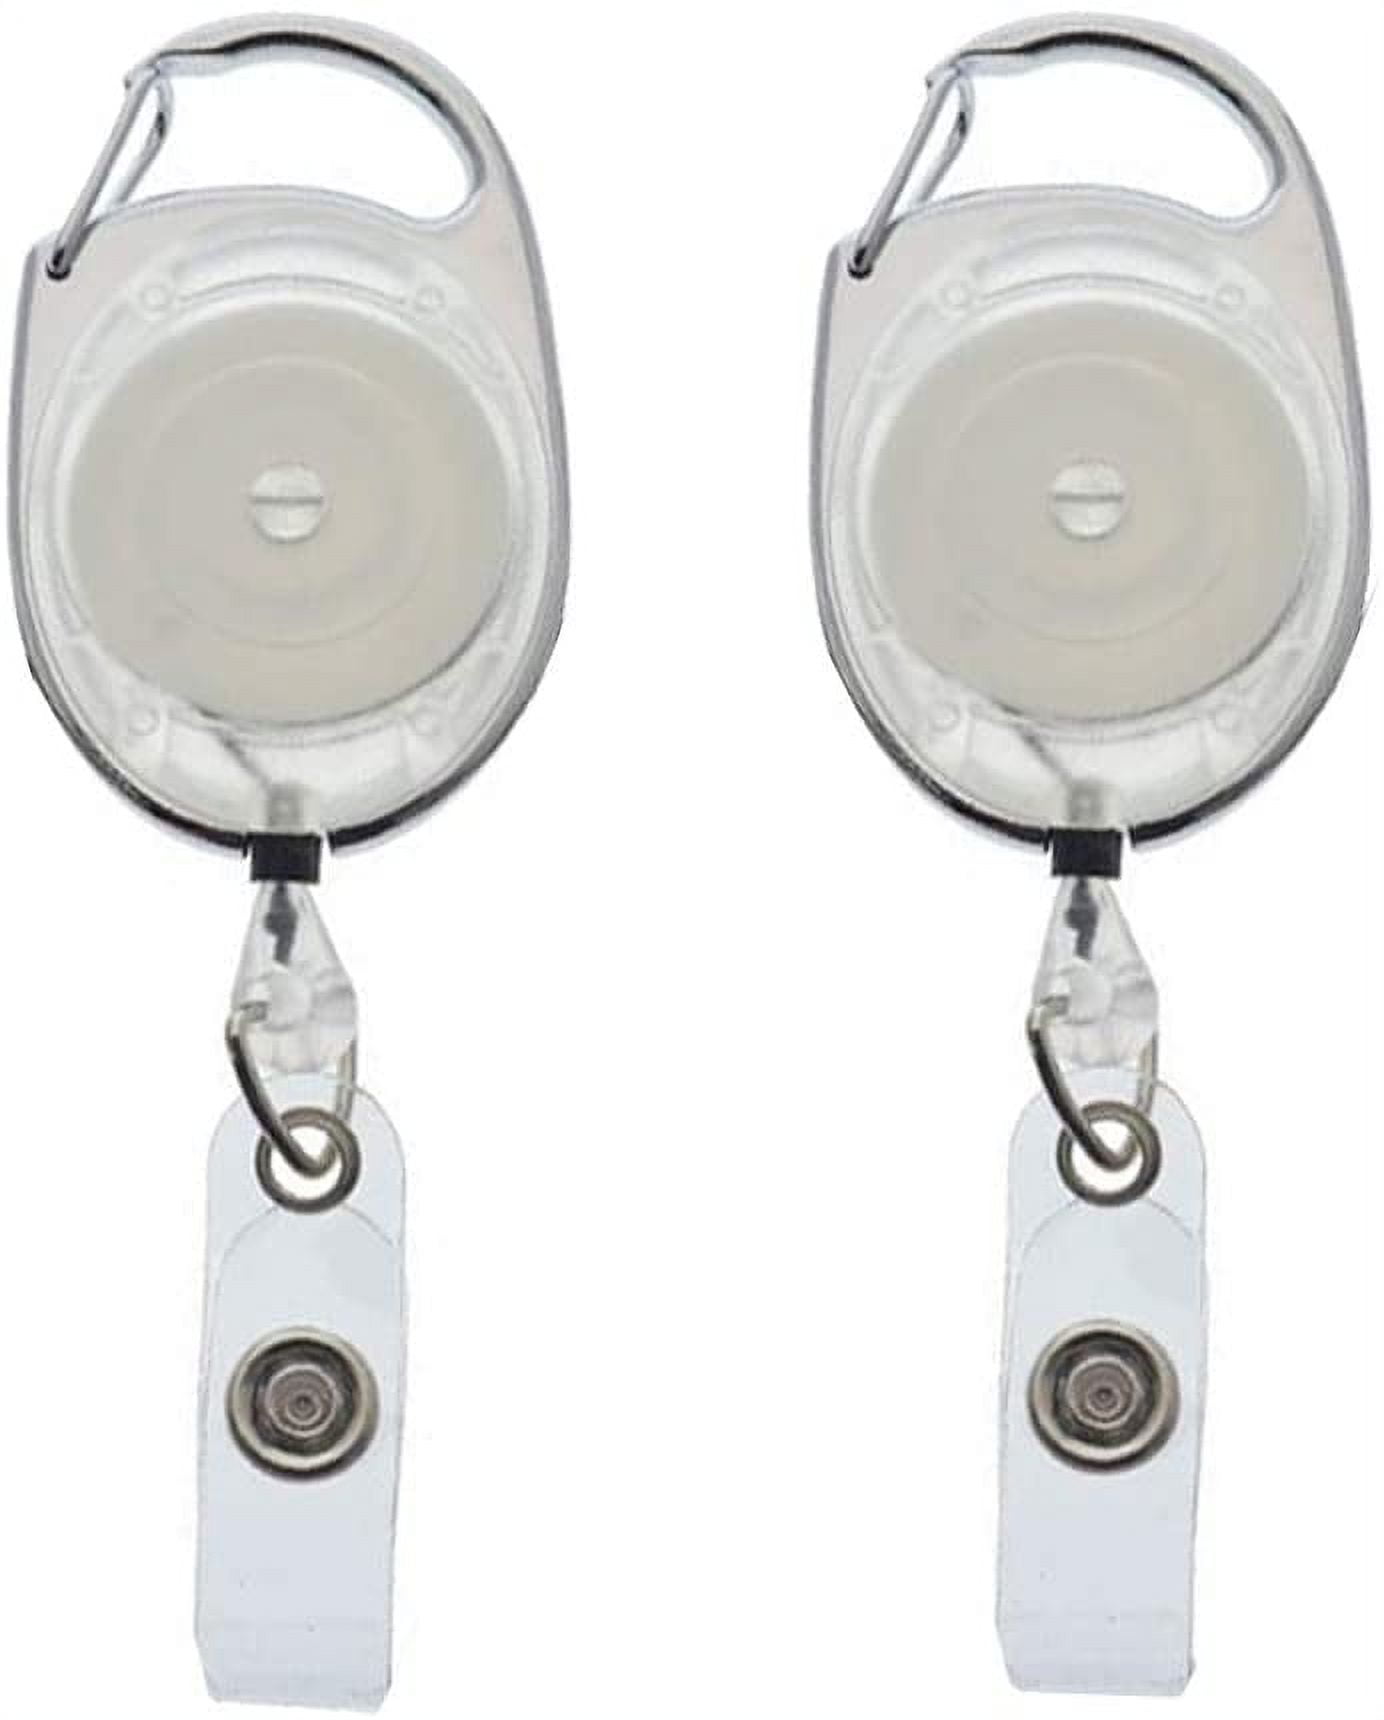 2 Pack - Specialist ID Premium Retractable Badge Reels with Carabiner Belt Loop  Clip and ID Holder Strap by Specialist ID (White) 